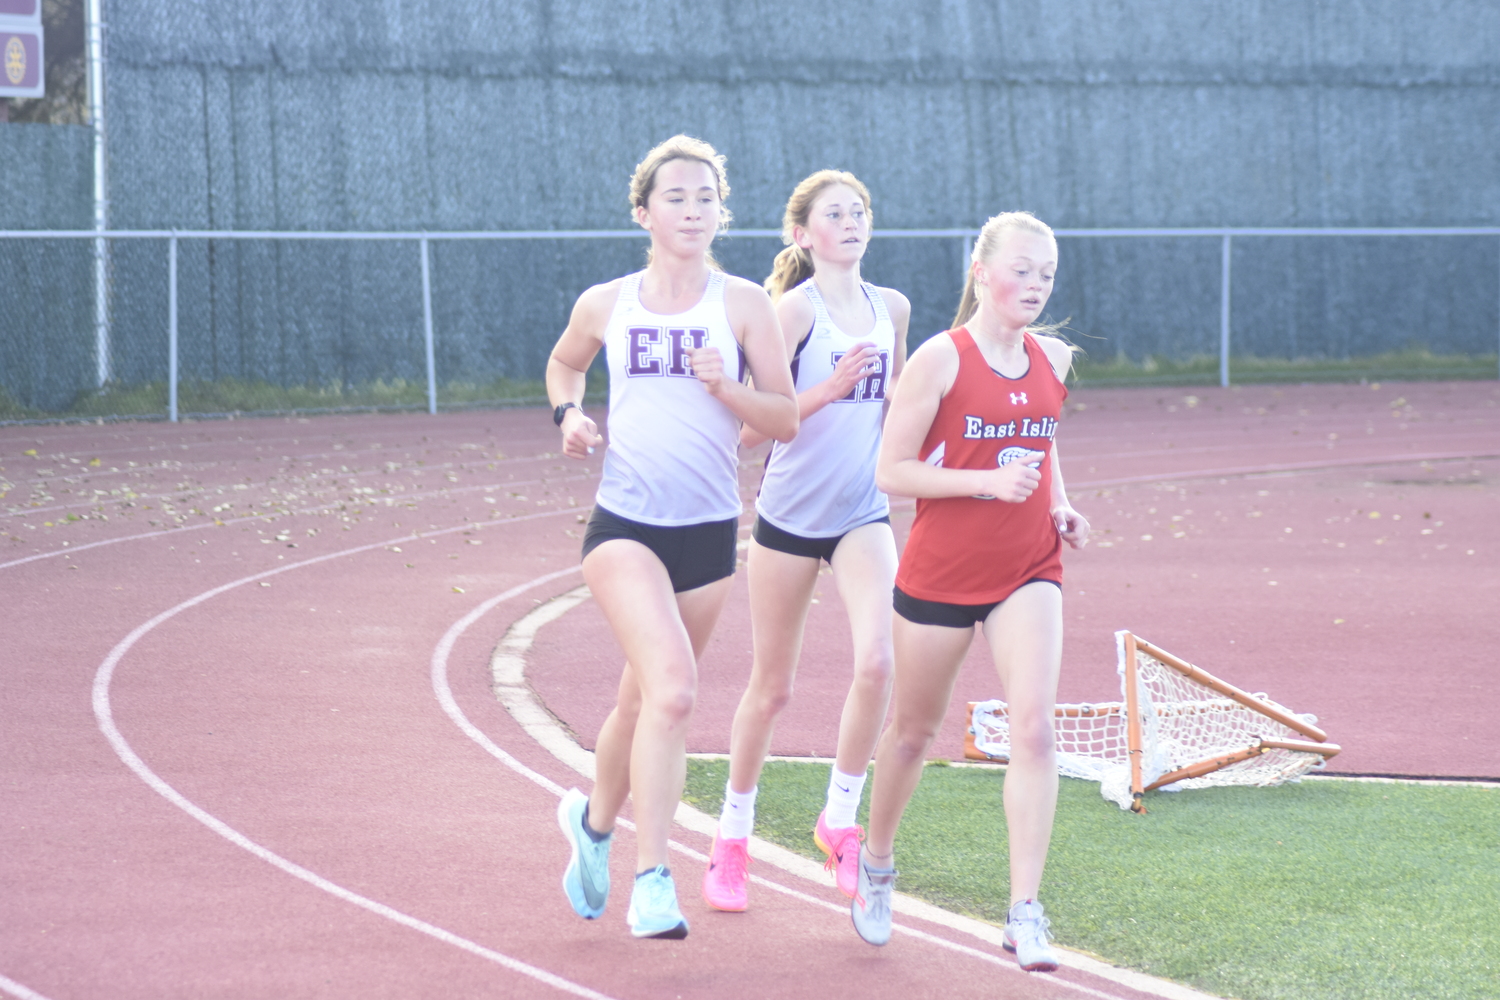 East Hampton's Dylan Cashin, left, and Pierson's Sara O'Brien on the tail of an East Islip runner in the 3,200-meter race of last week's dual meet.   DREW BUDD